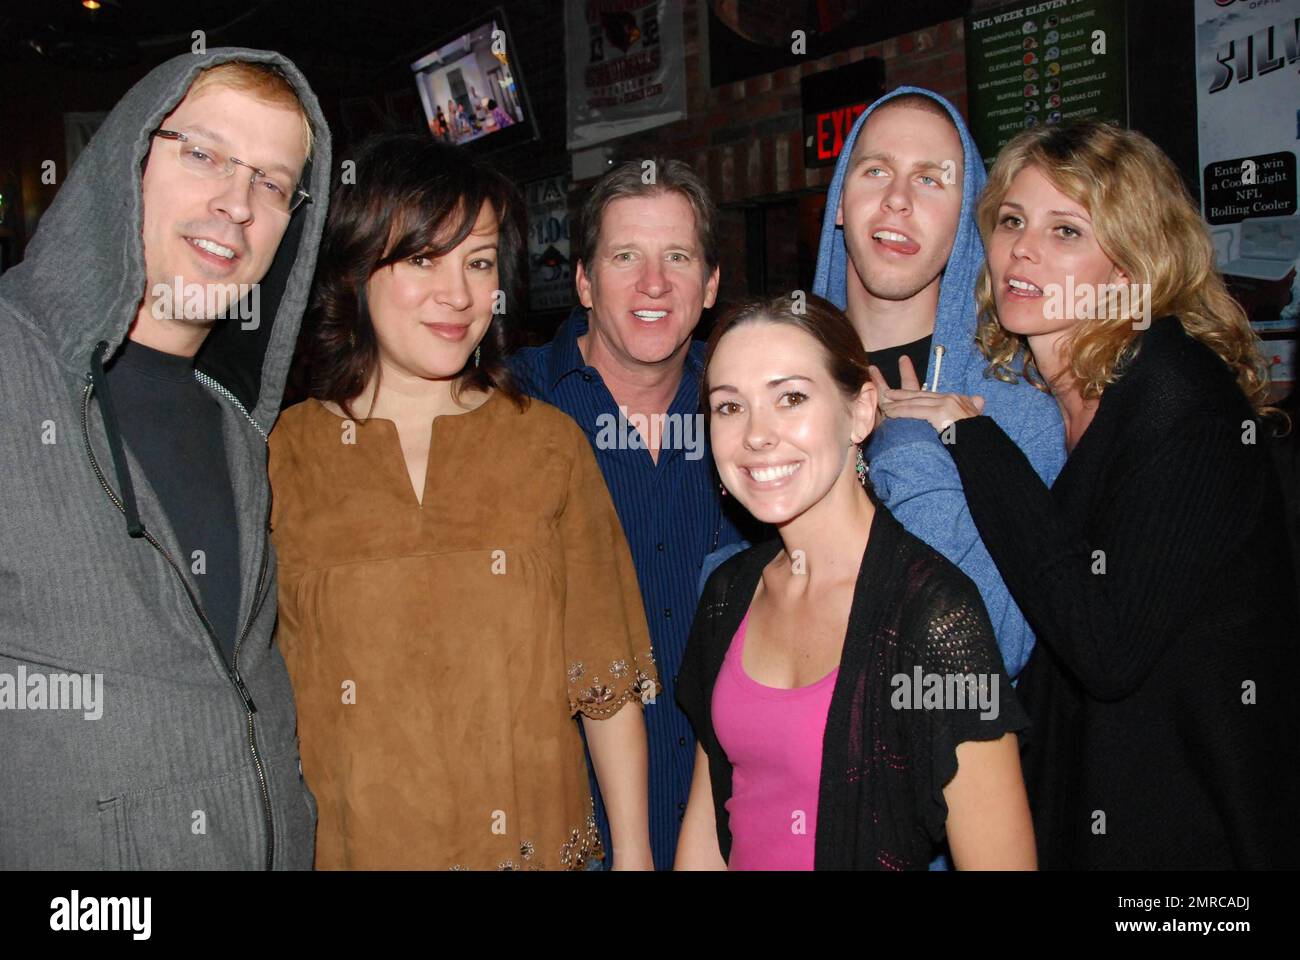 Actress Jennifer Tilly and poker player boyfriend Phil Laak hang out with friends at K O'Donnell's Bar & Grill. Denver, CO. 11/20/09. Stock Photo